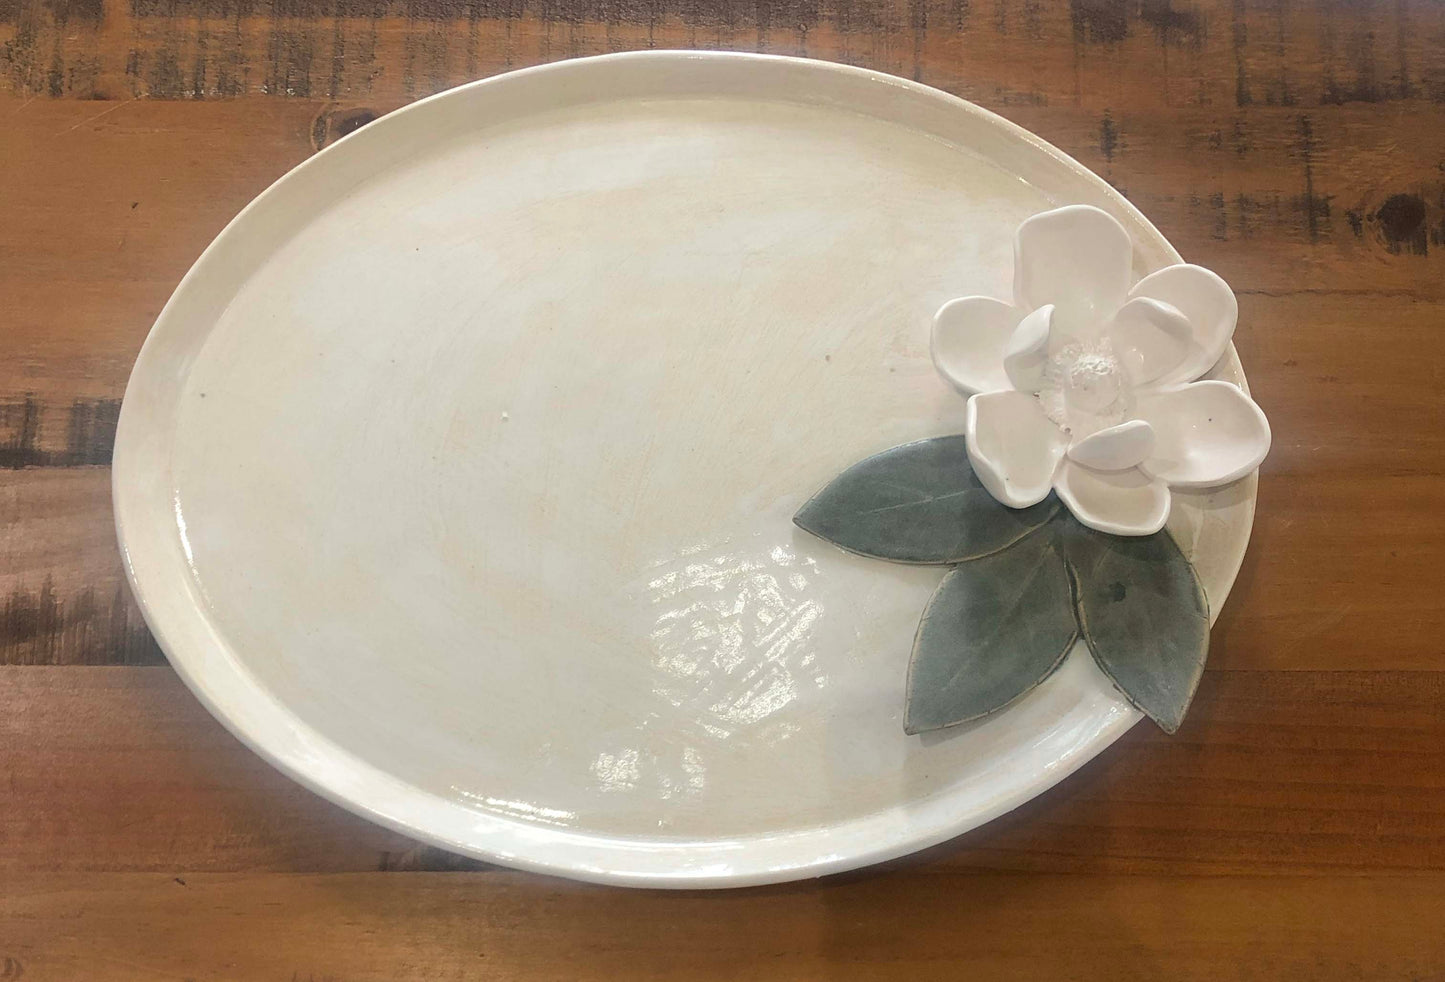 A In Full Bloom Series - Magnolia Oval Platter - Large